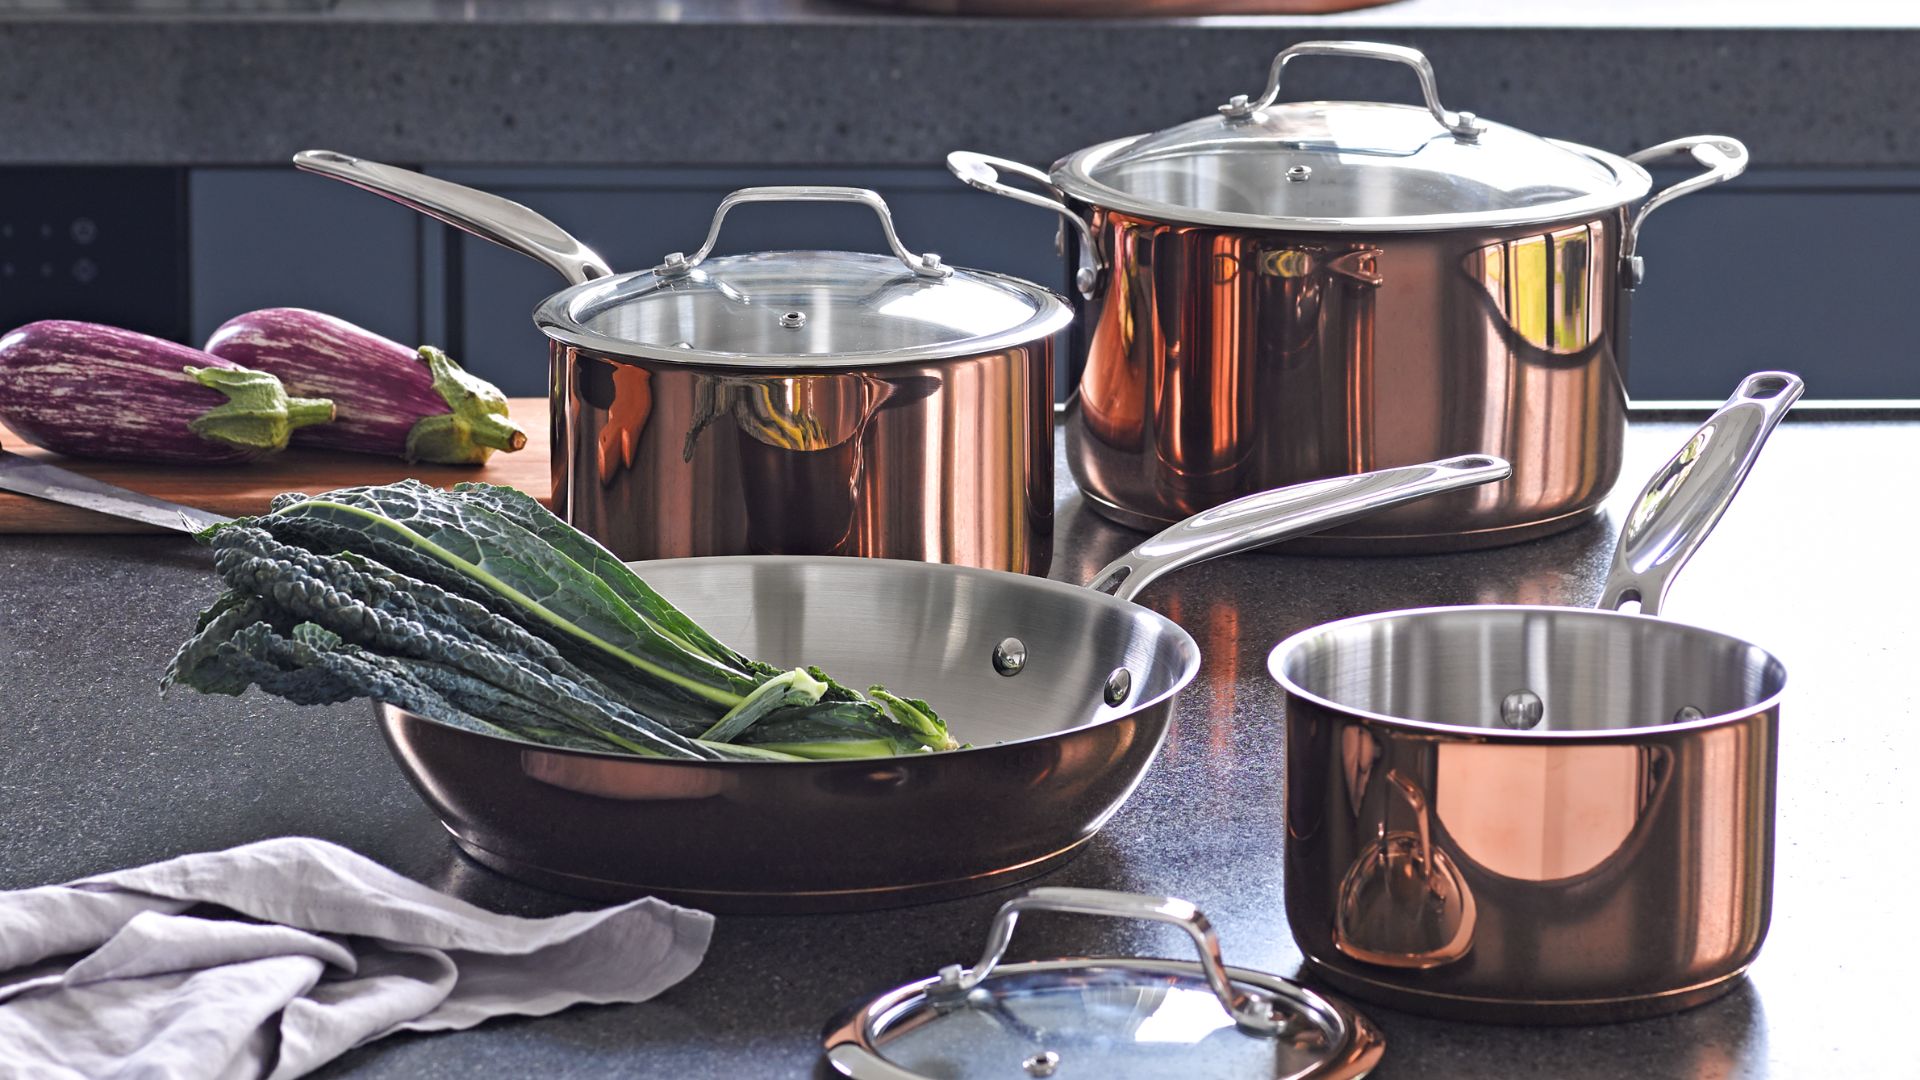 Simmering vs boiling – What they mean and why you should master them both